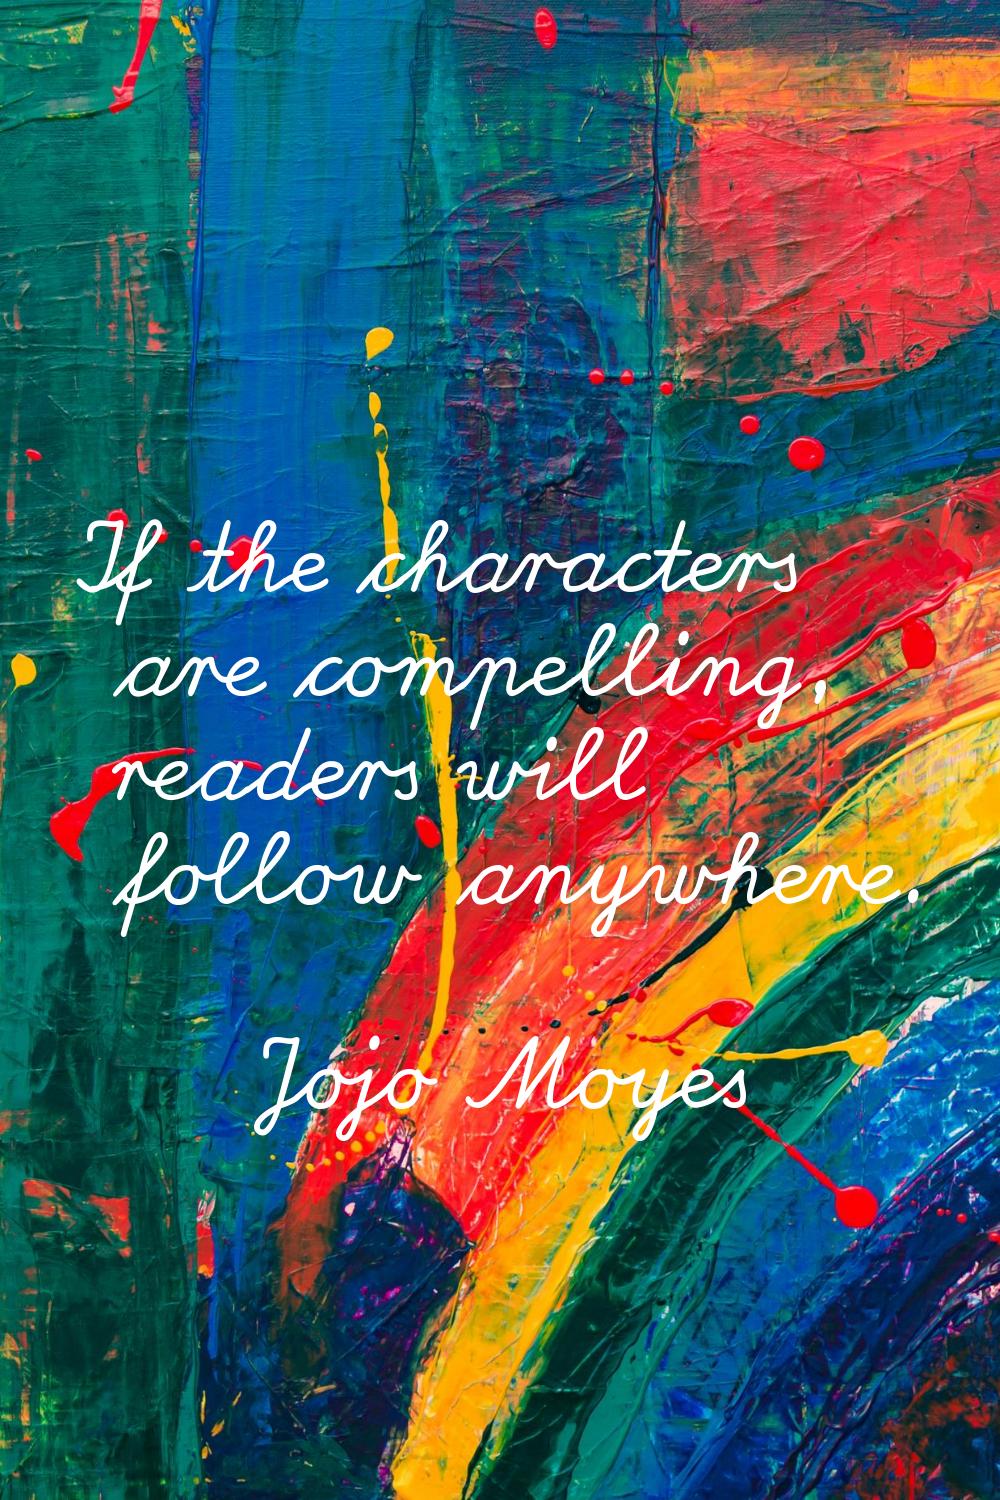 If the characters are compelling, readers will follow anywhere.